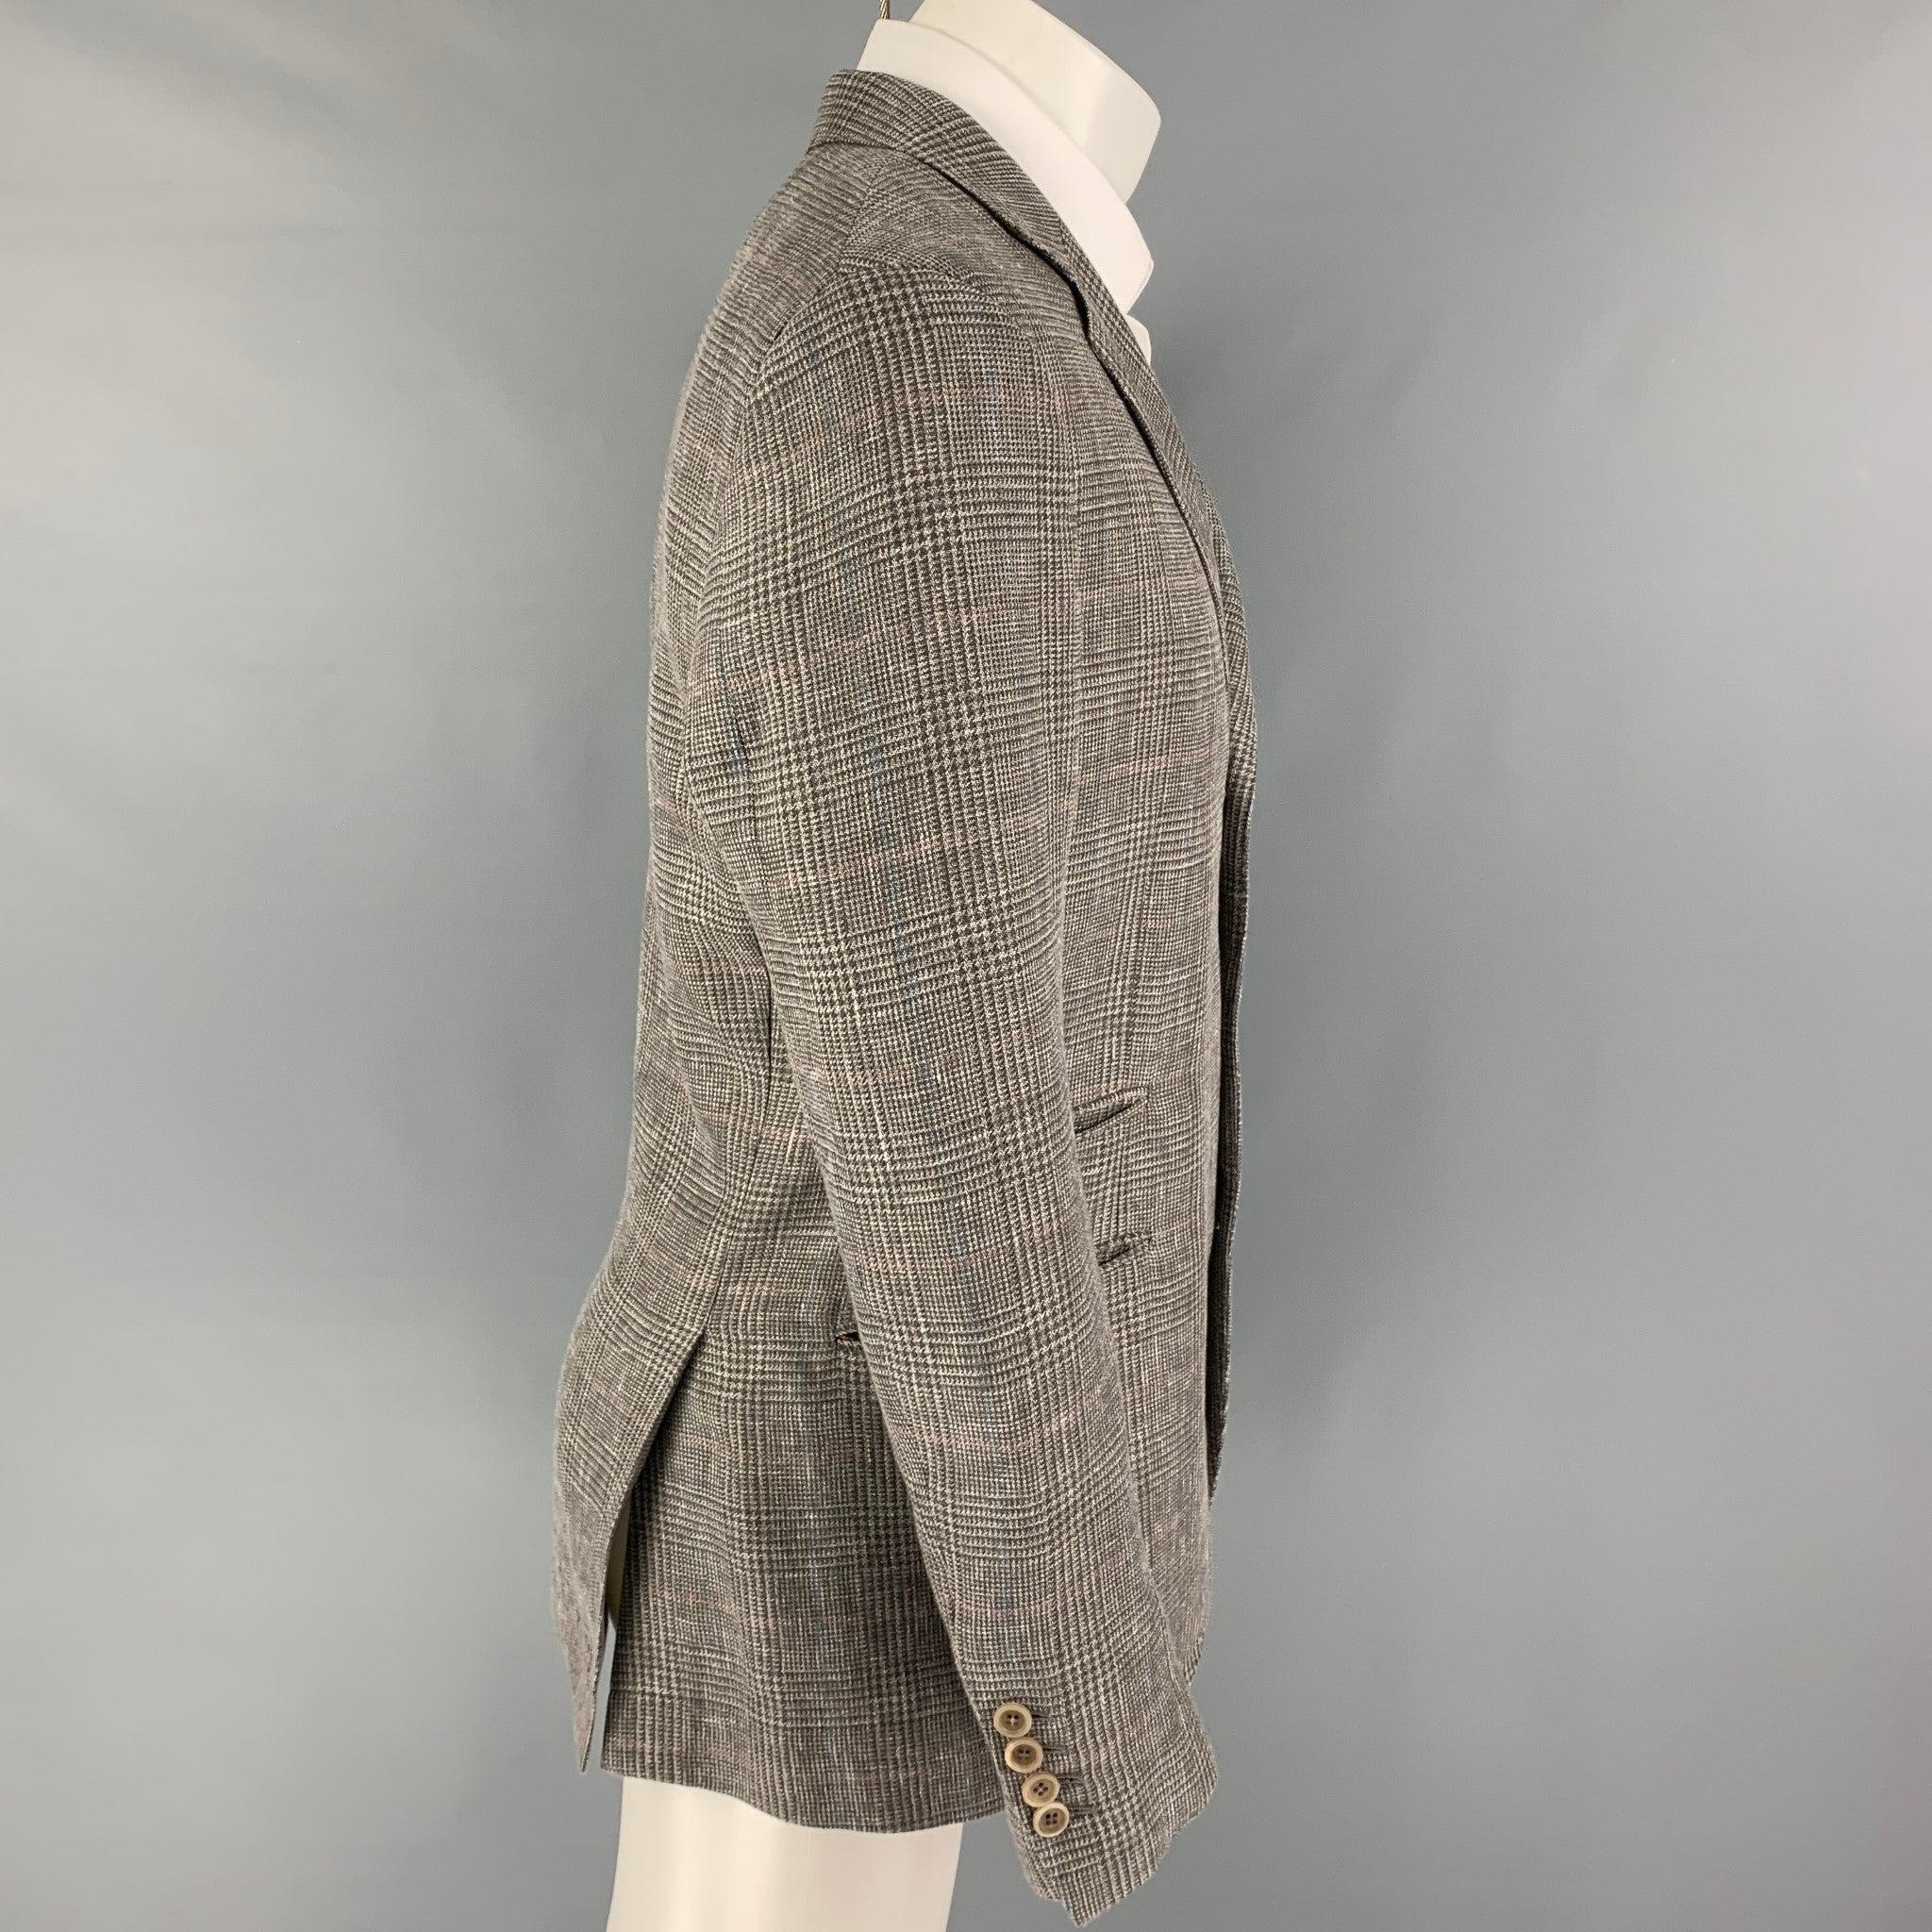 BRUNELLO CUCINELLI Size 40 Blue Glenplaid Wool Blend Sport Coat In Good Condition For Sale In San Francisco, CA